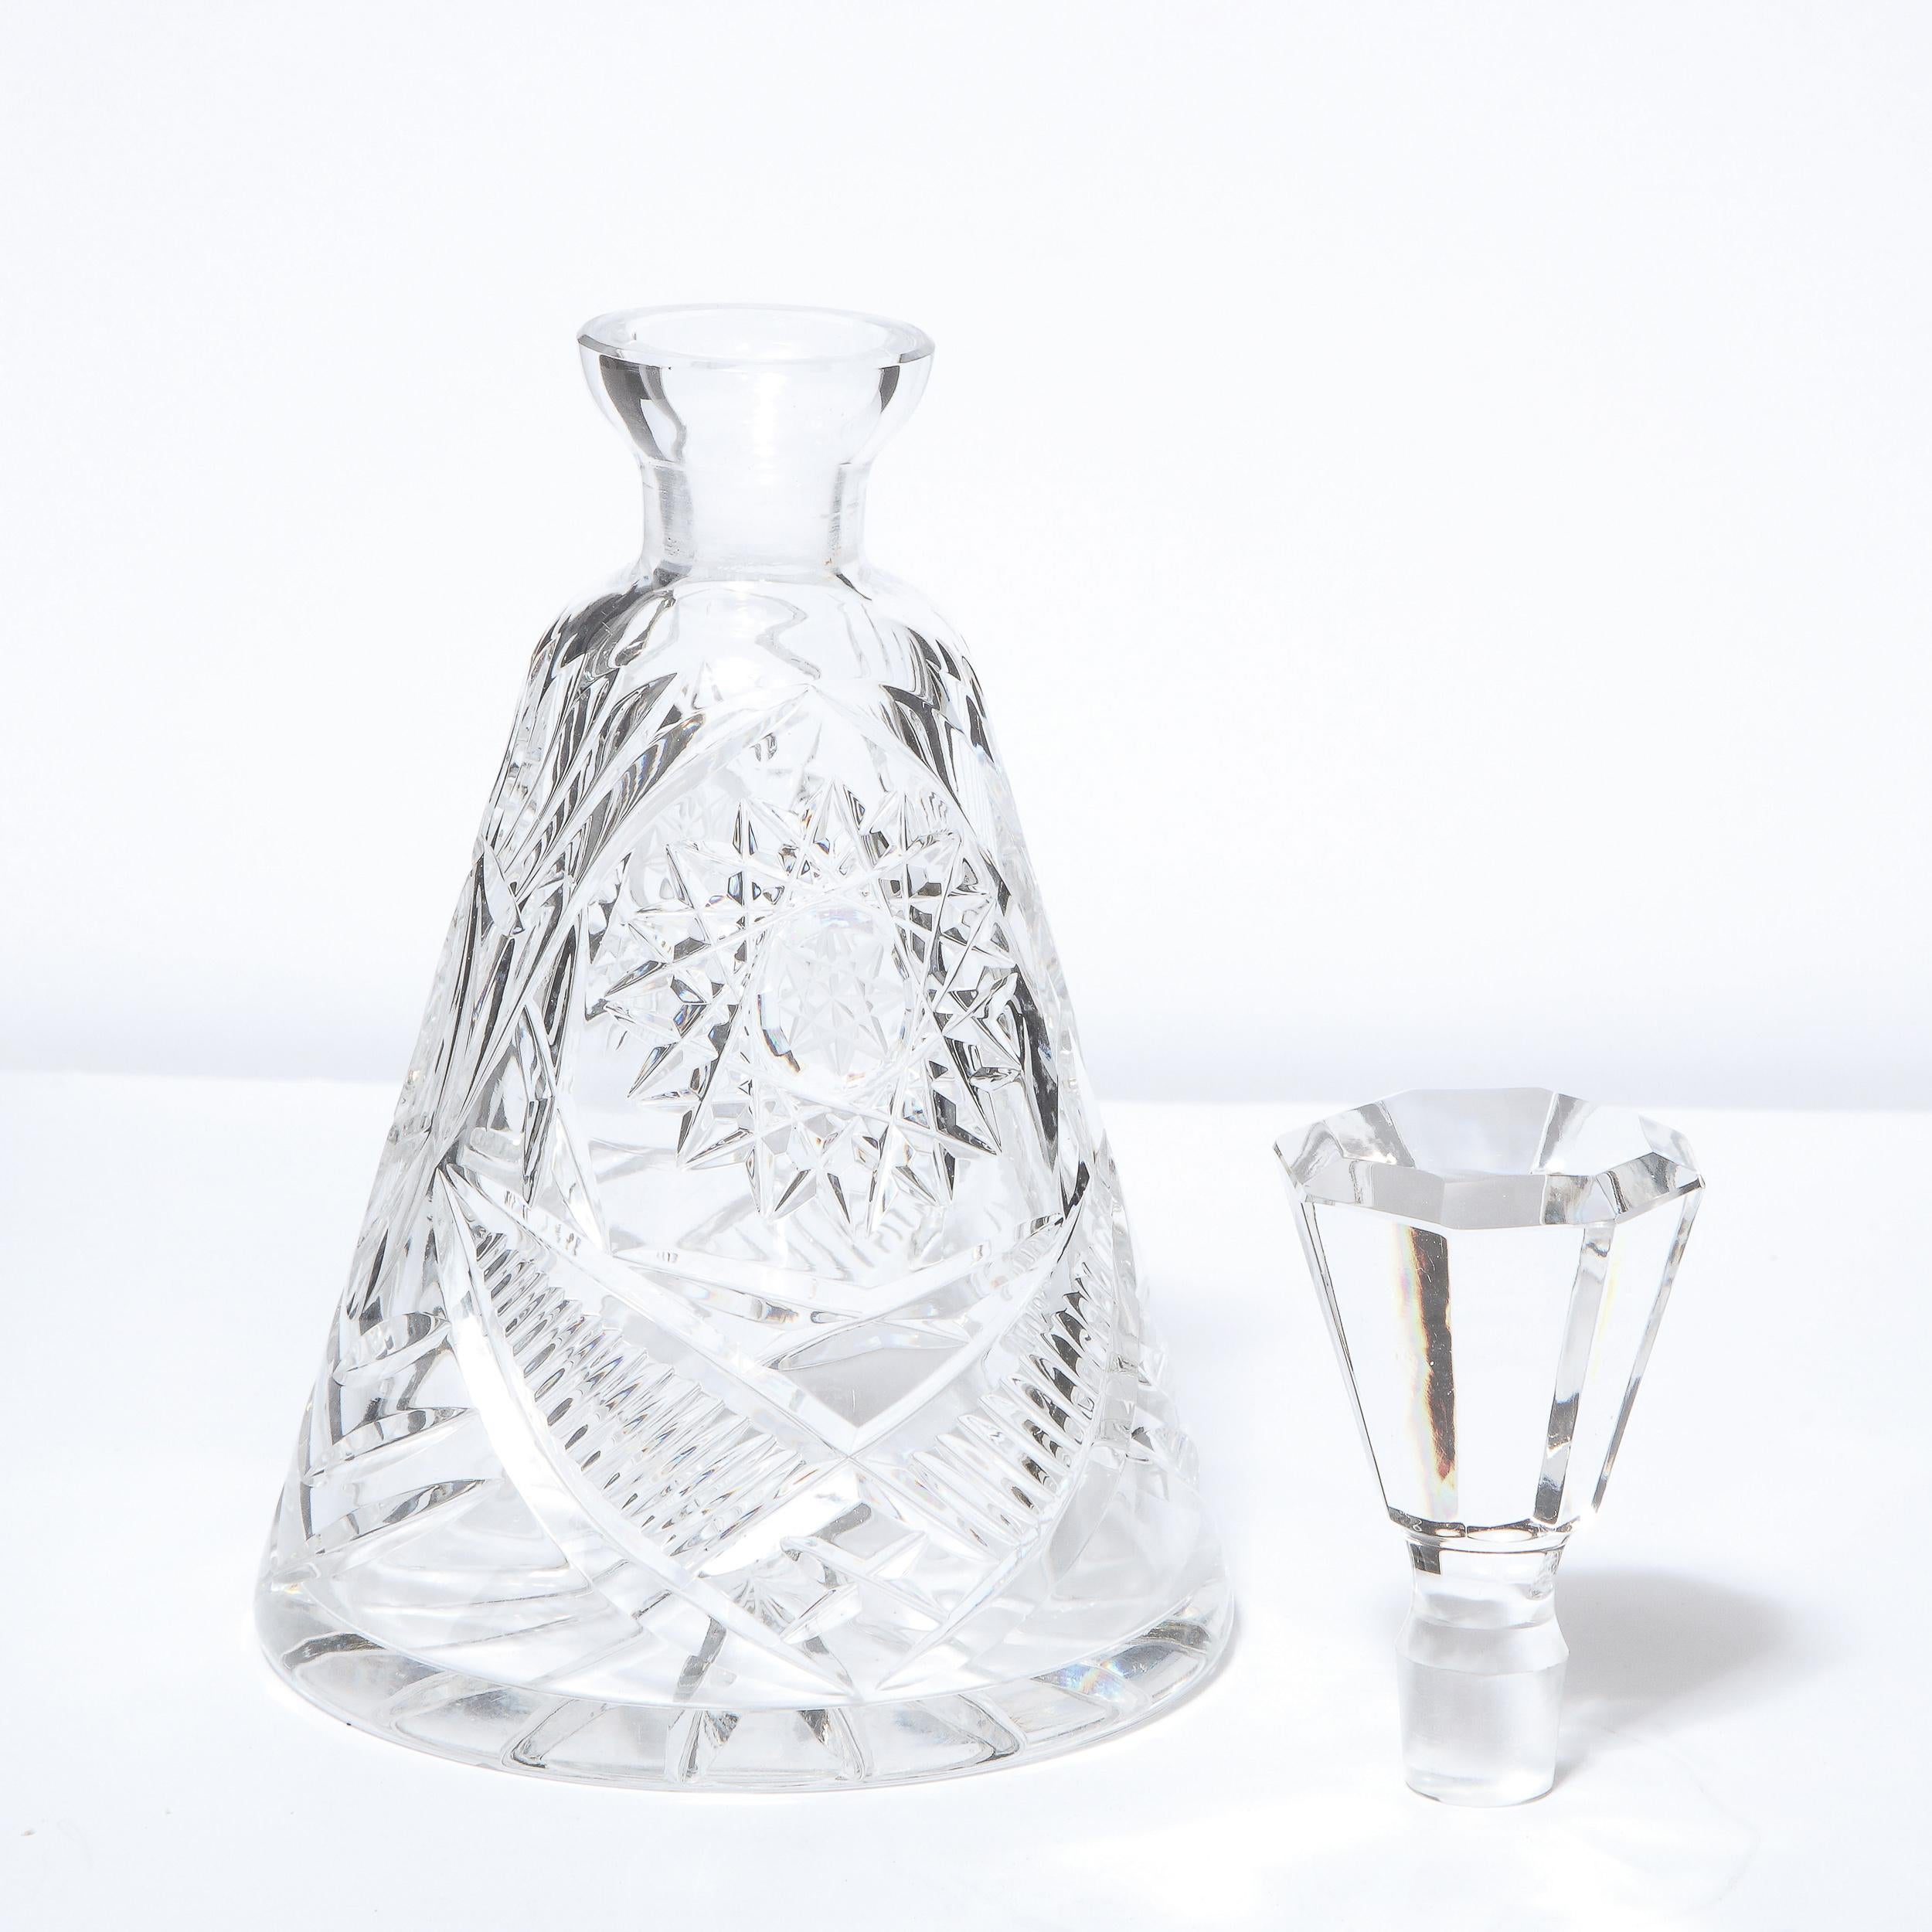 Mid-Century Modern Translucent Etched Crystal Decanter with Geometric Patterns 4